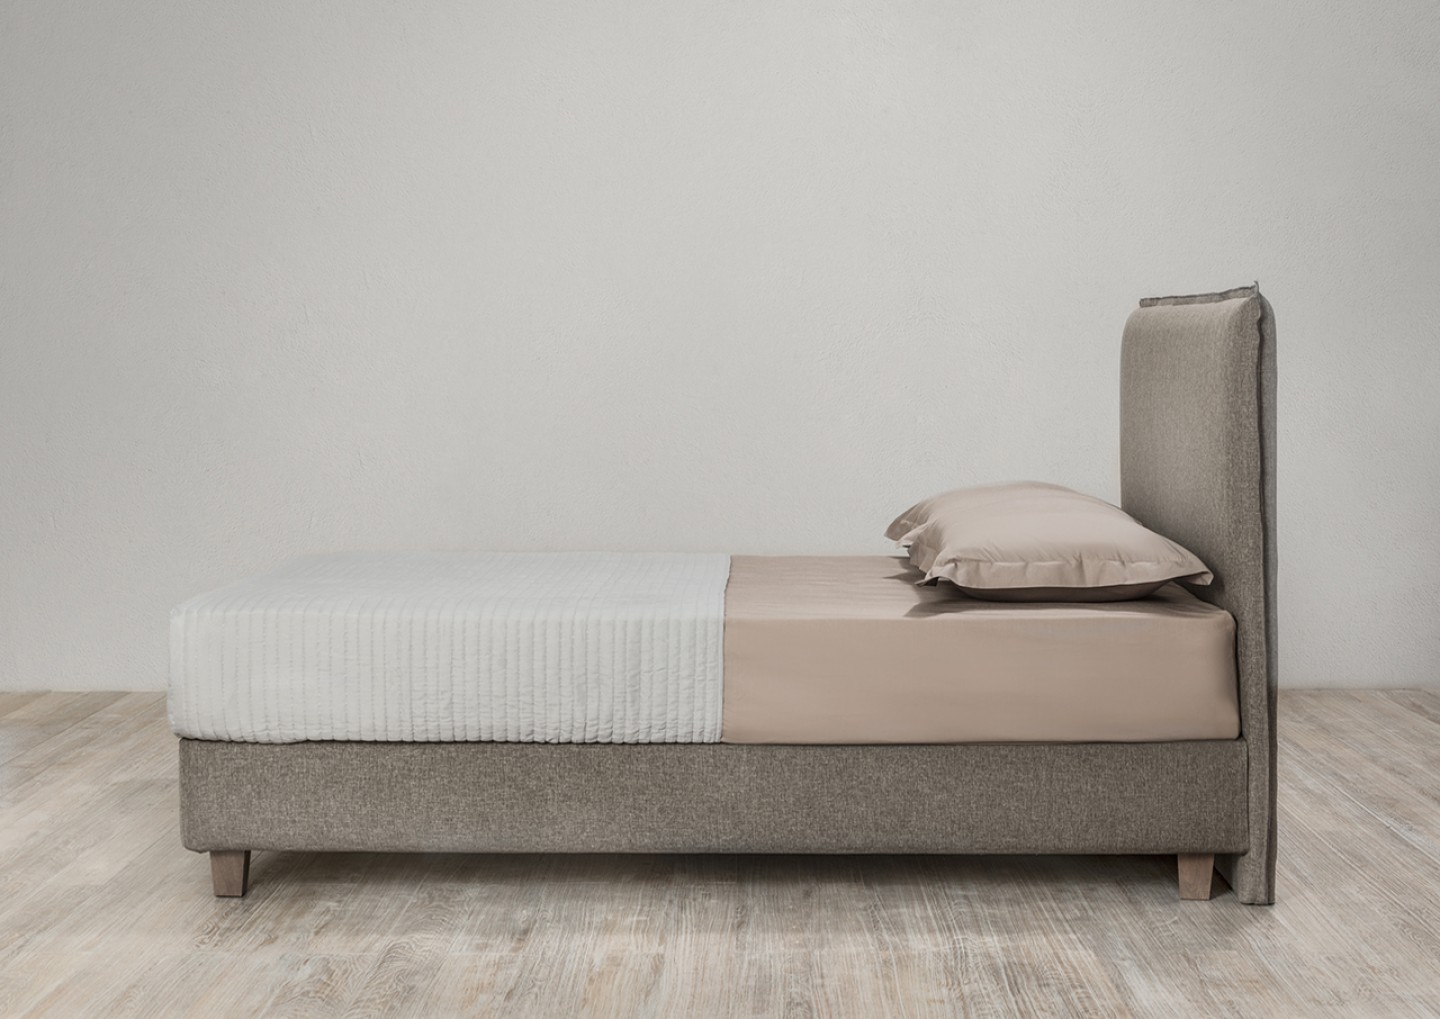 THE FUNKY BED by Elite Strom